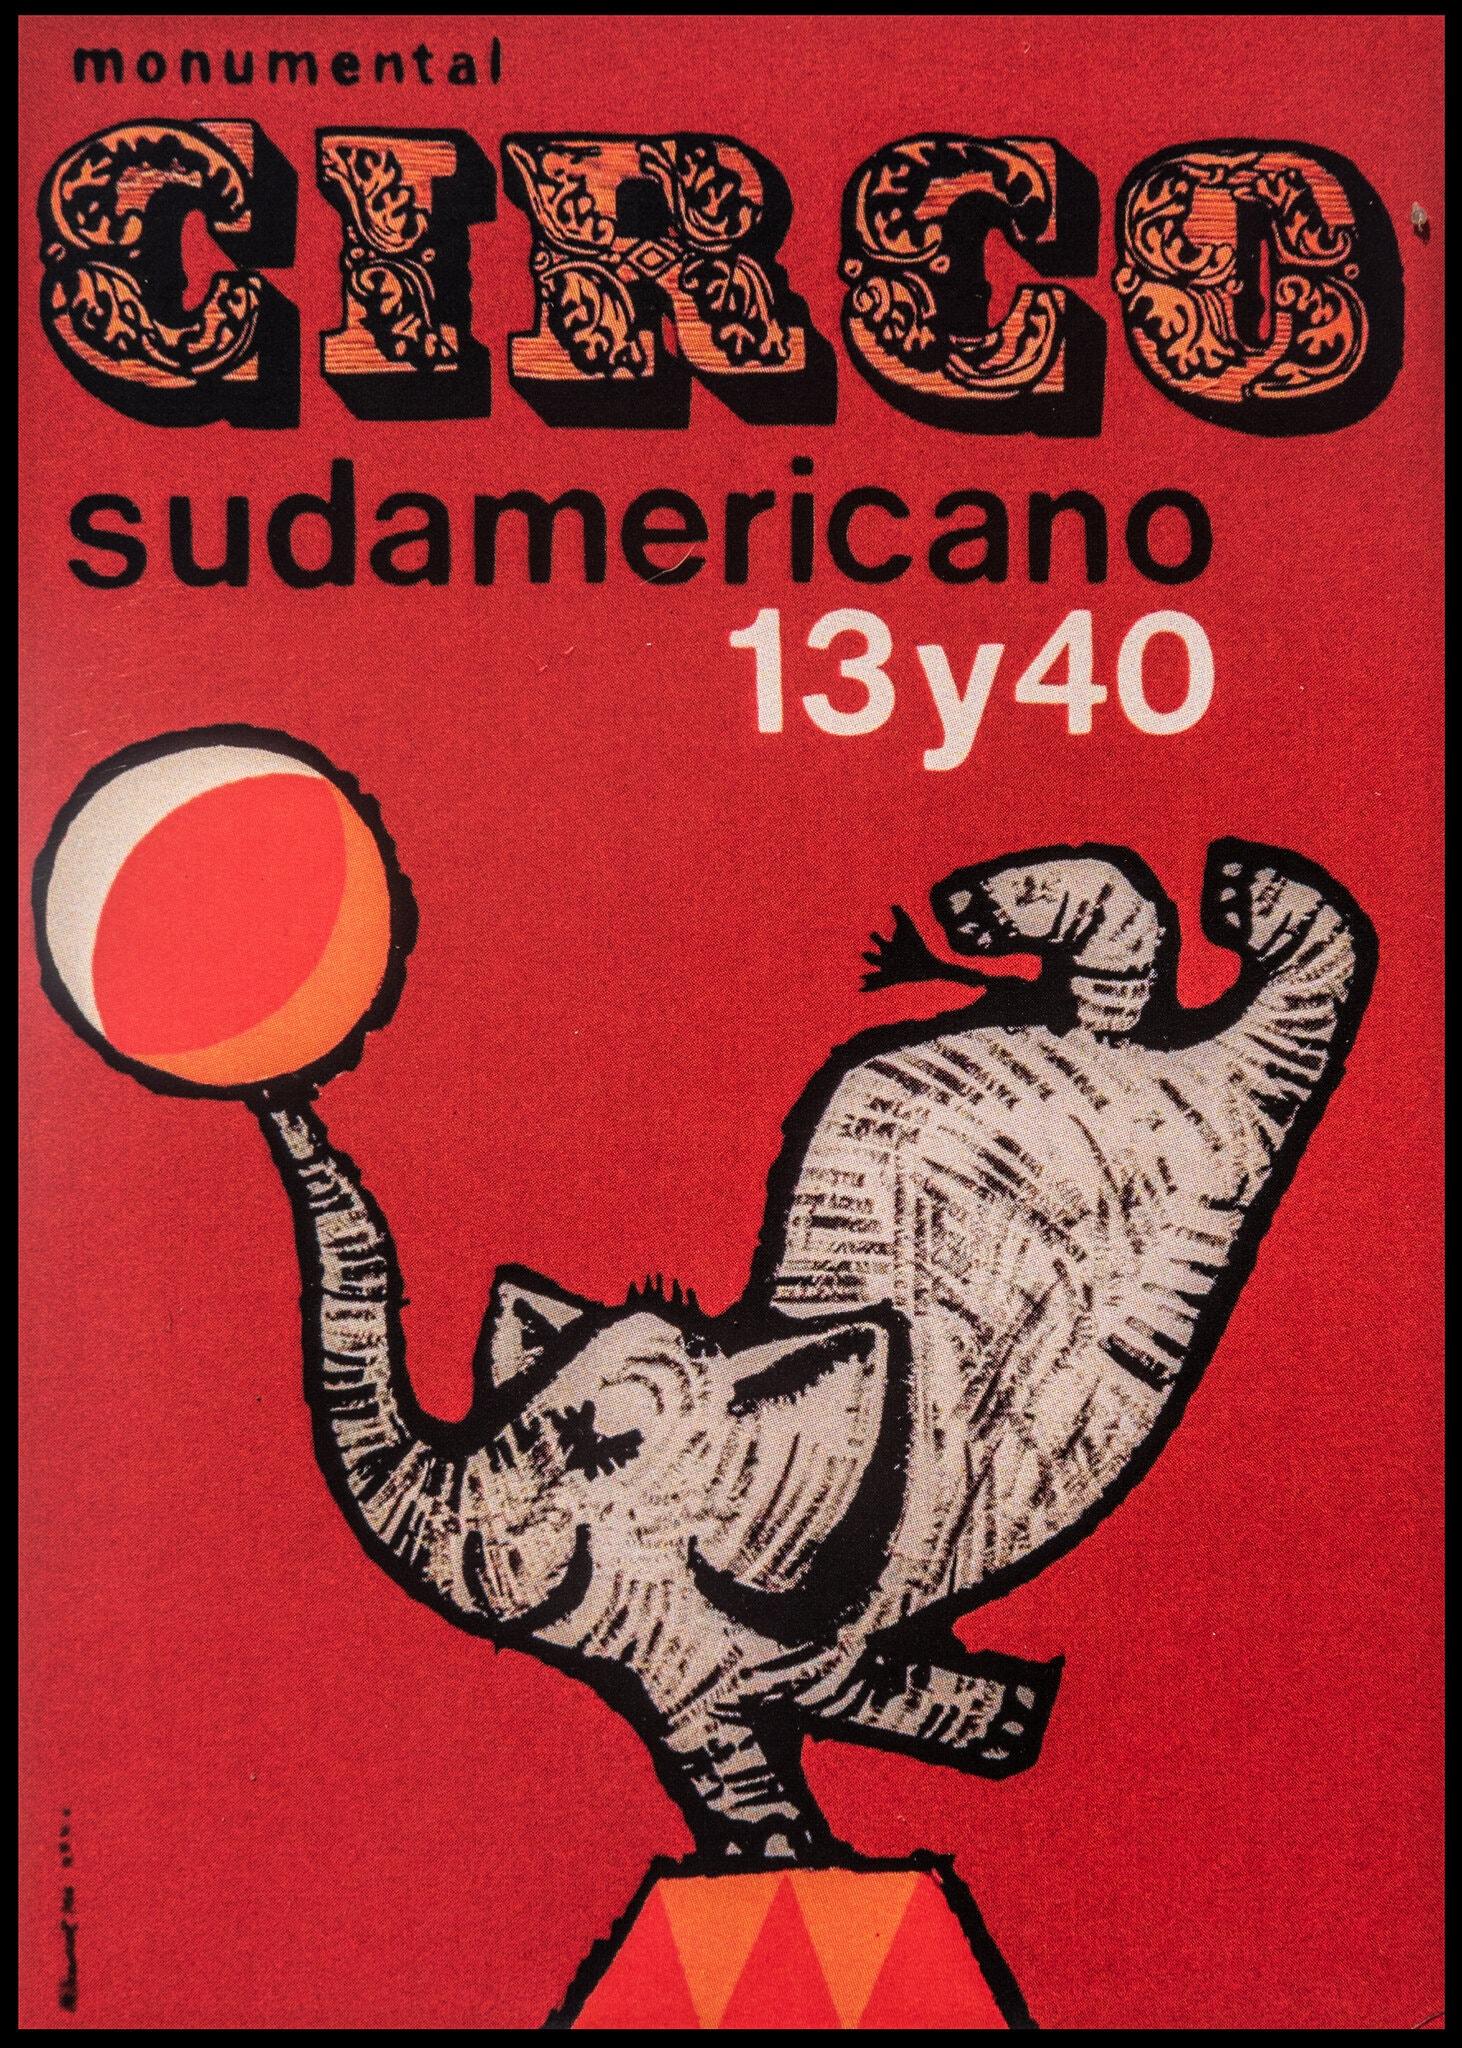 A depiction of Mara in a 1970 poster